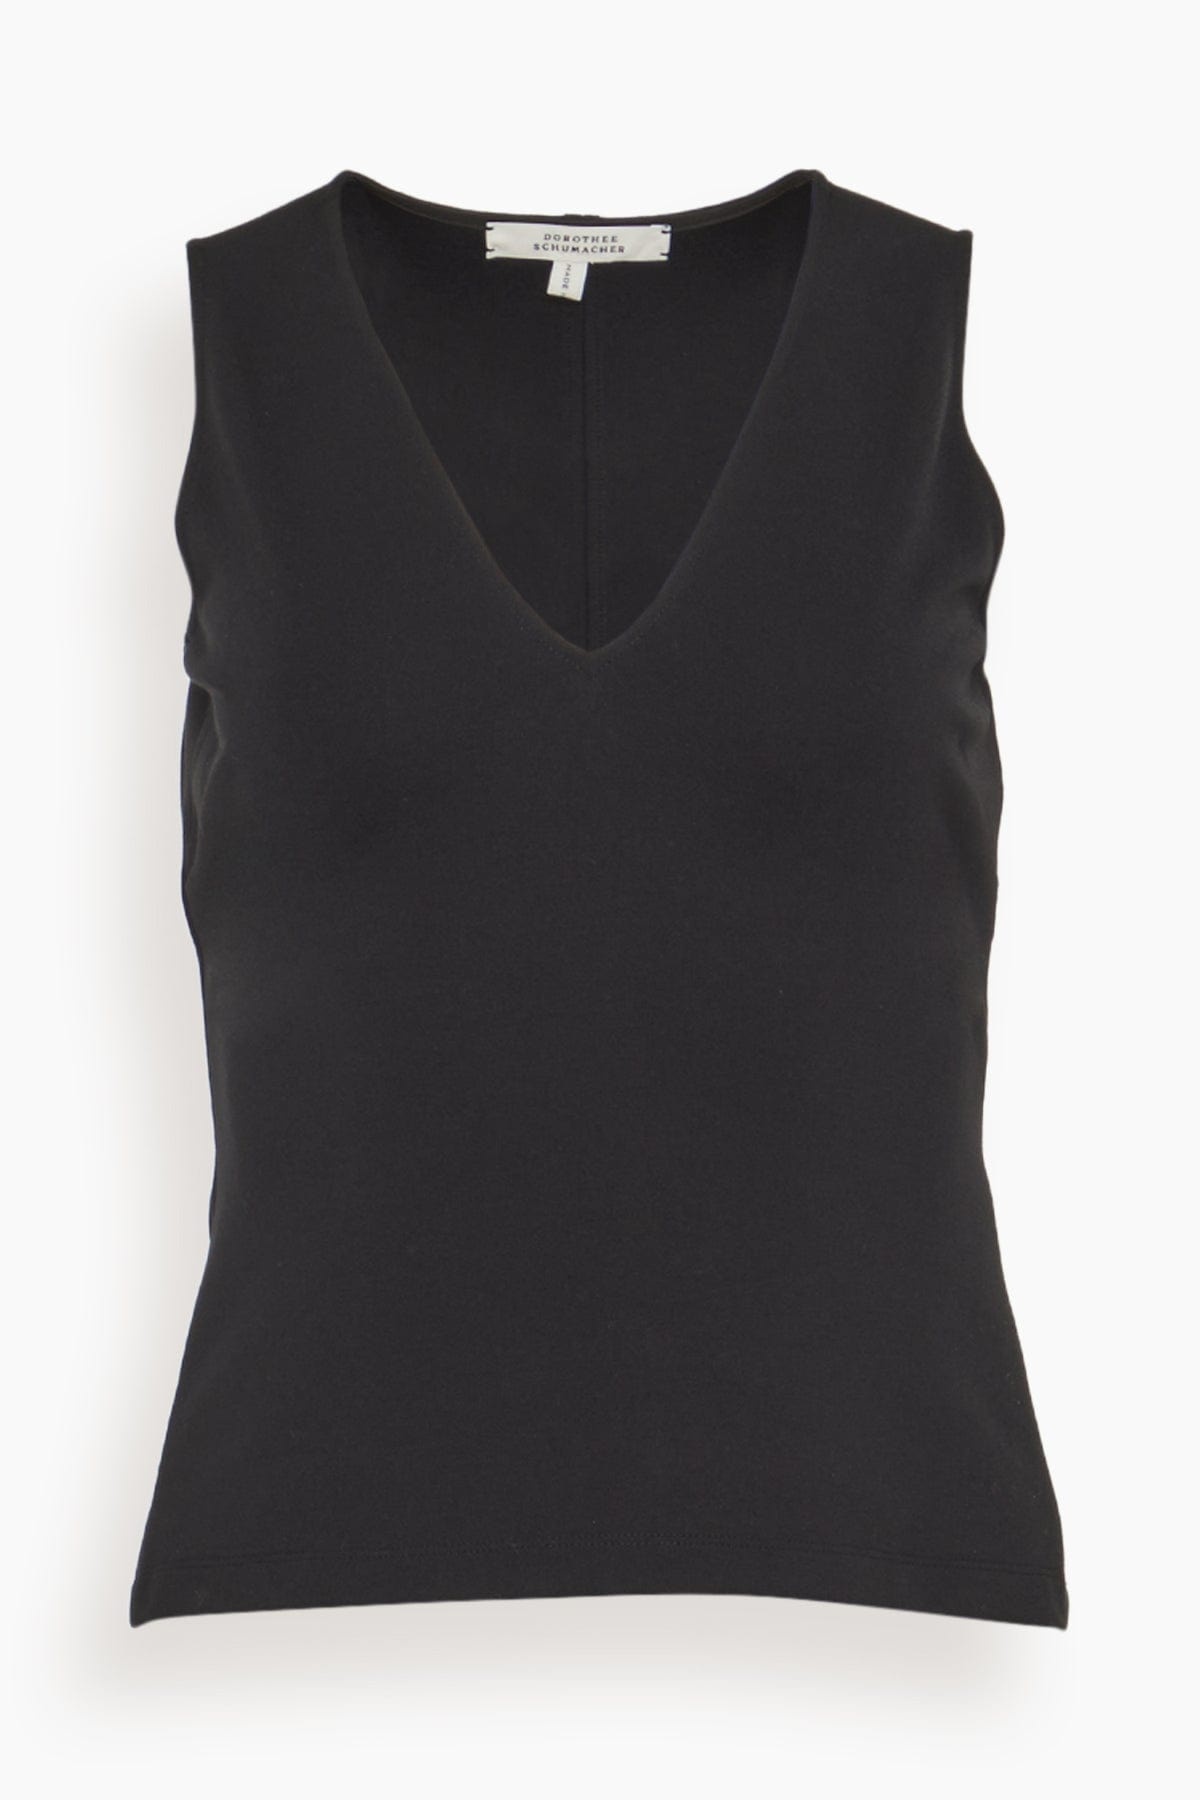 Emotional Essence Top in Pure Black - 1